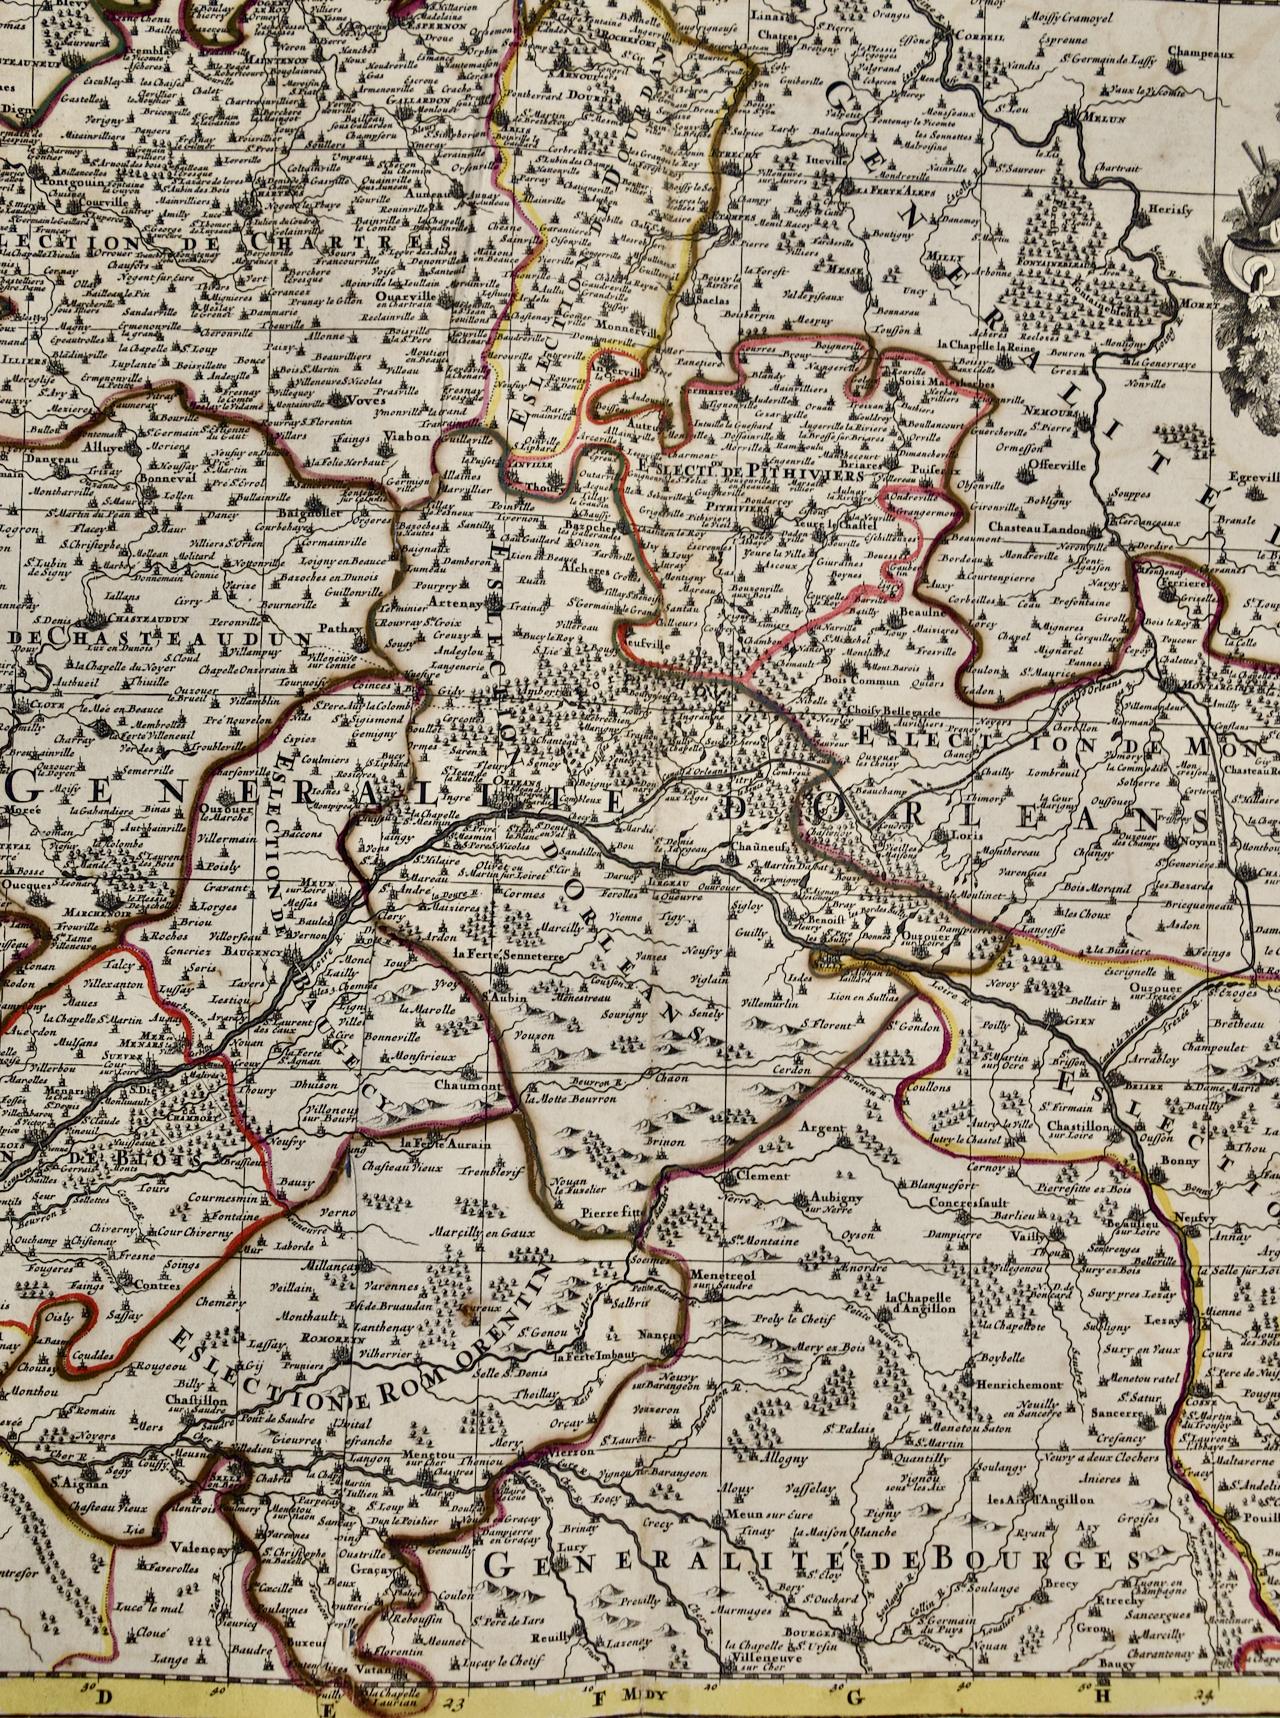 This large 17th century copper plate hand-colored engraved map entitled 